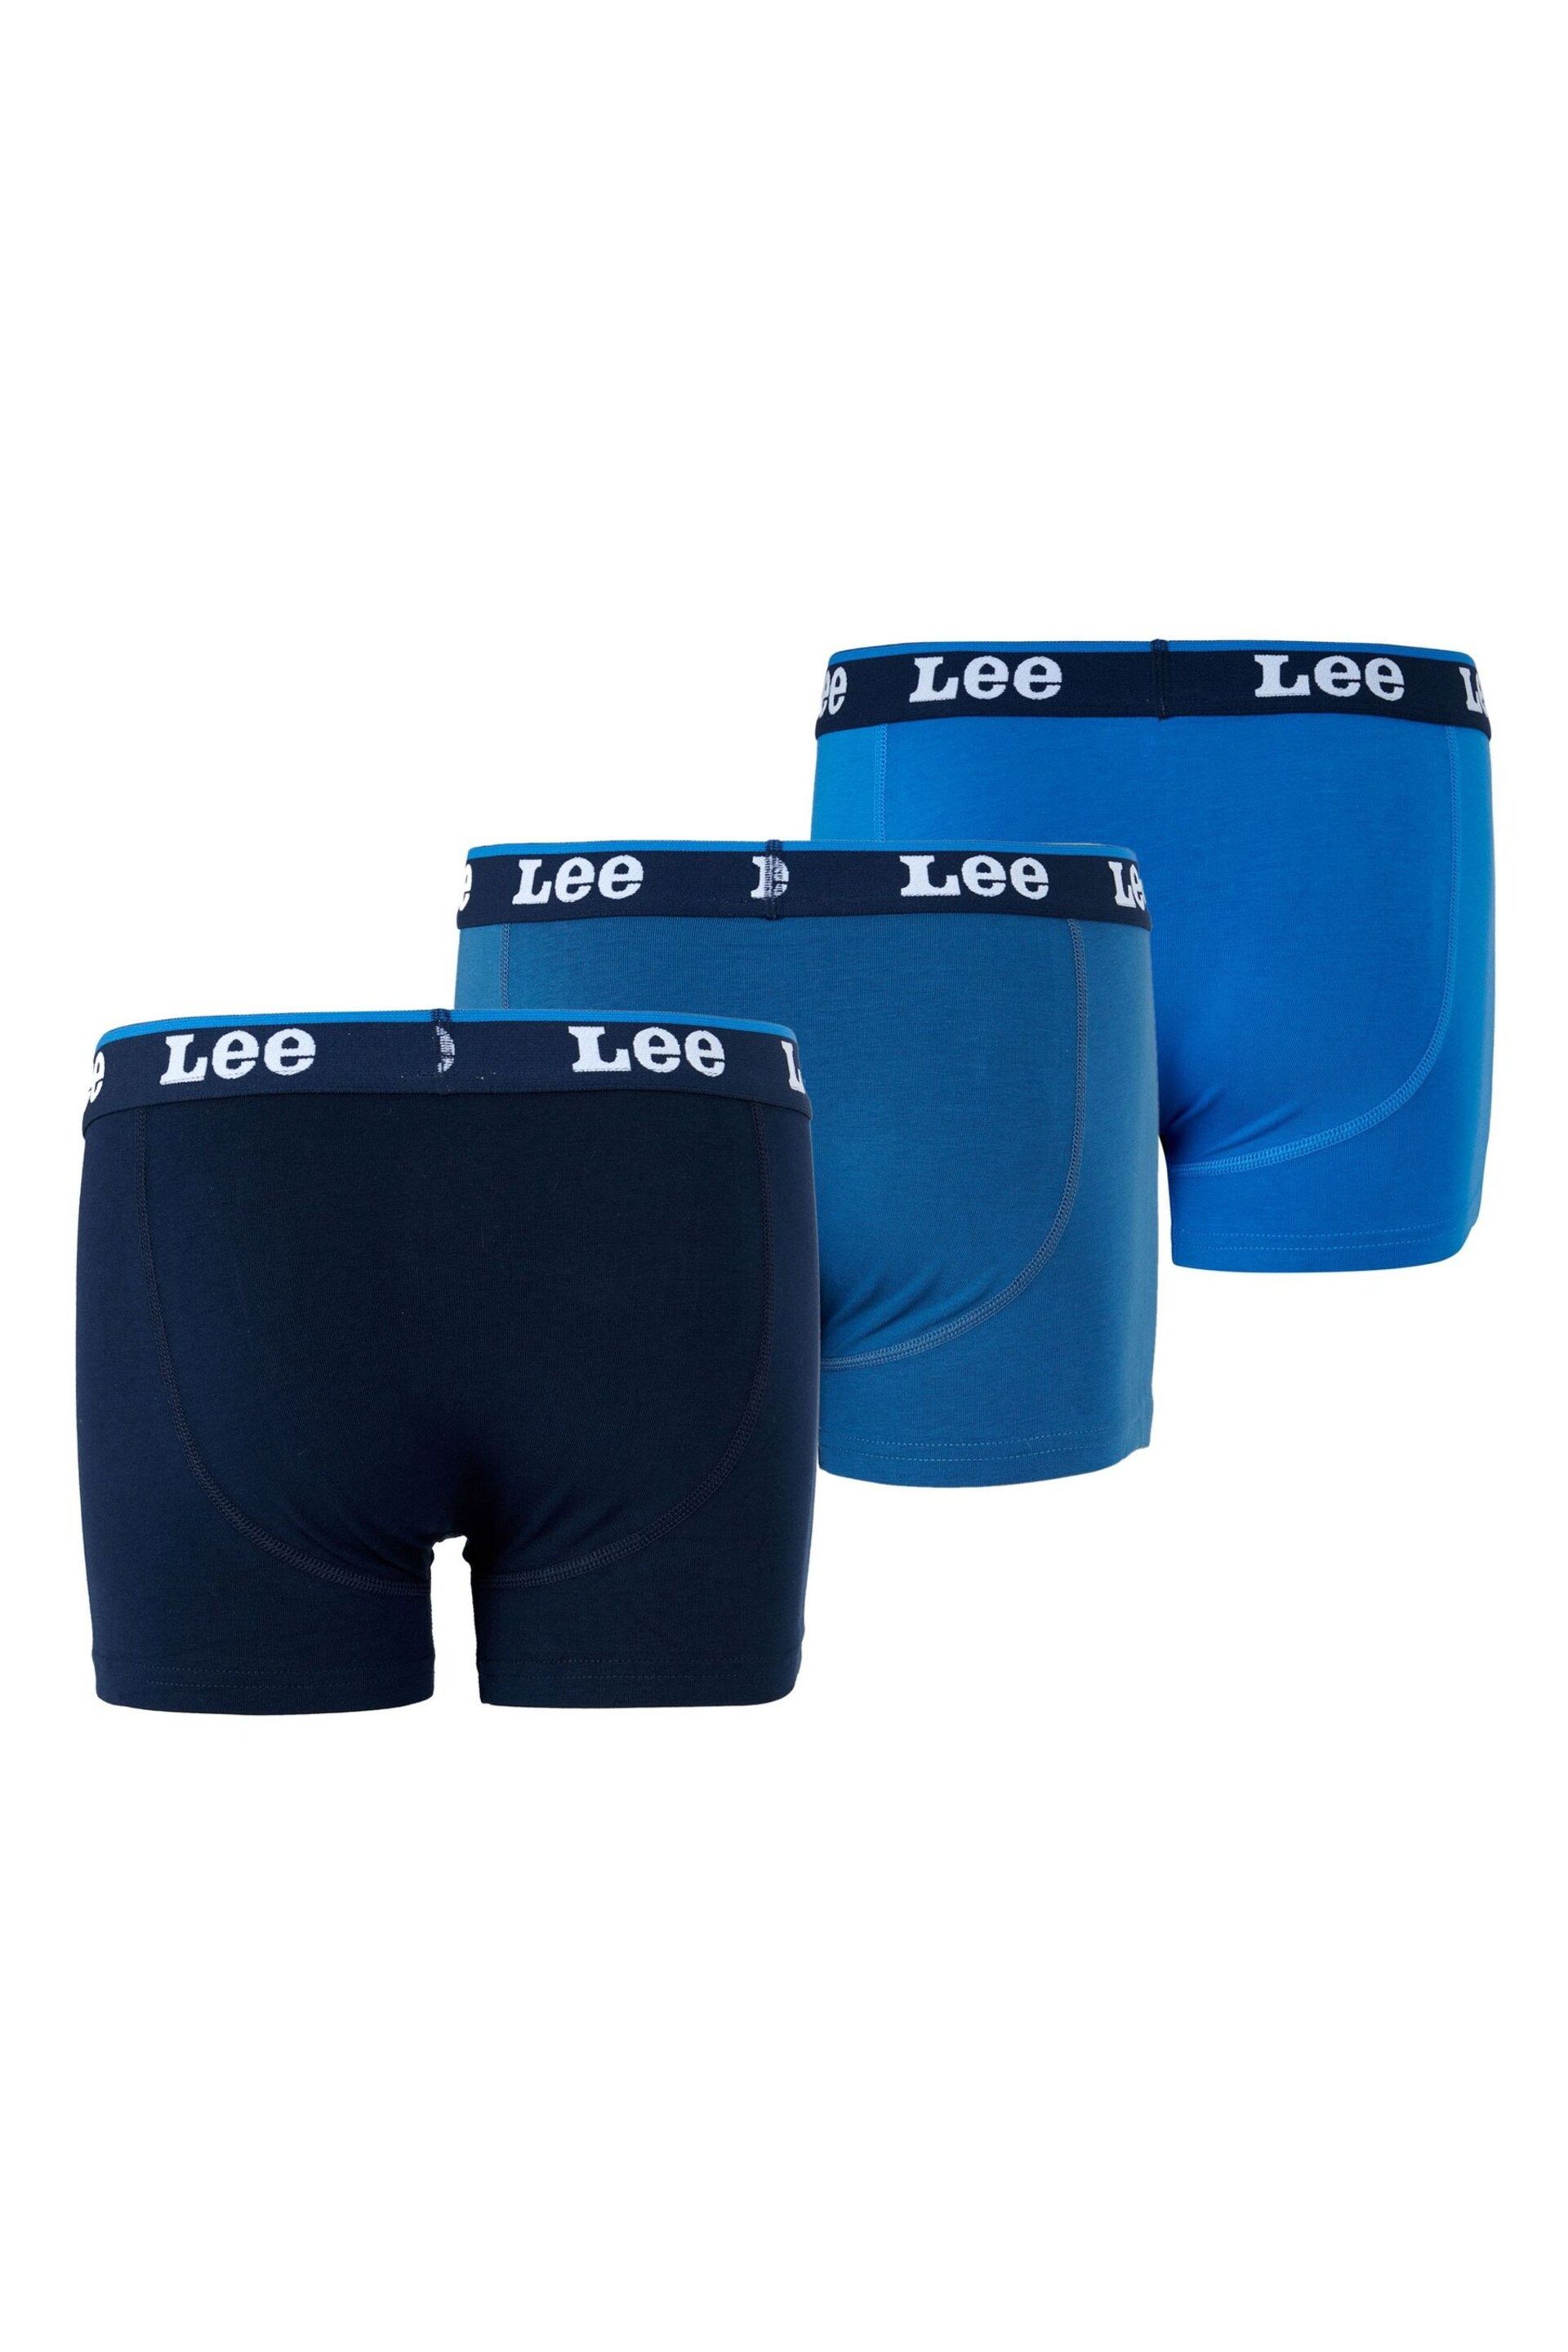 Lee Boys 3 Pack Boxers - Image 2 of 4